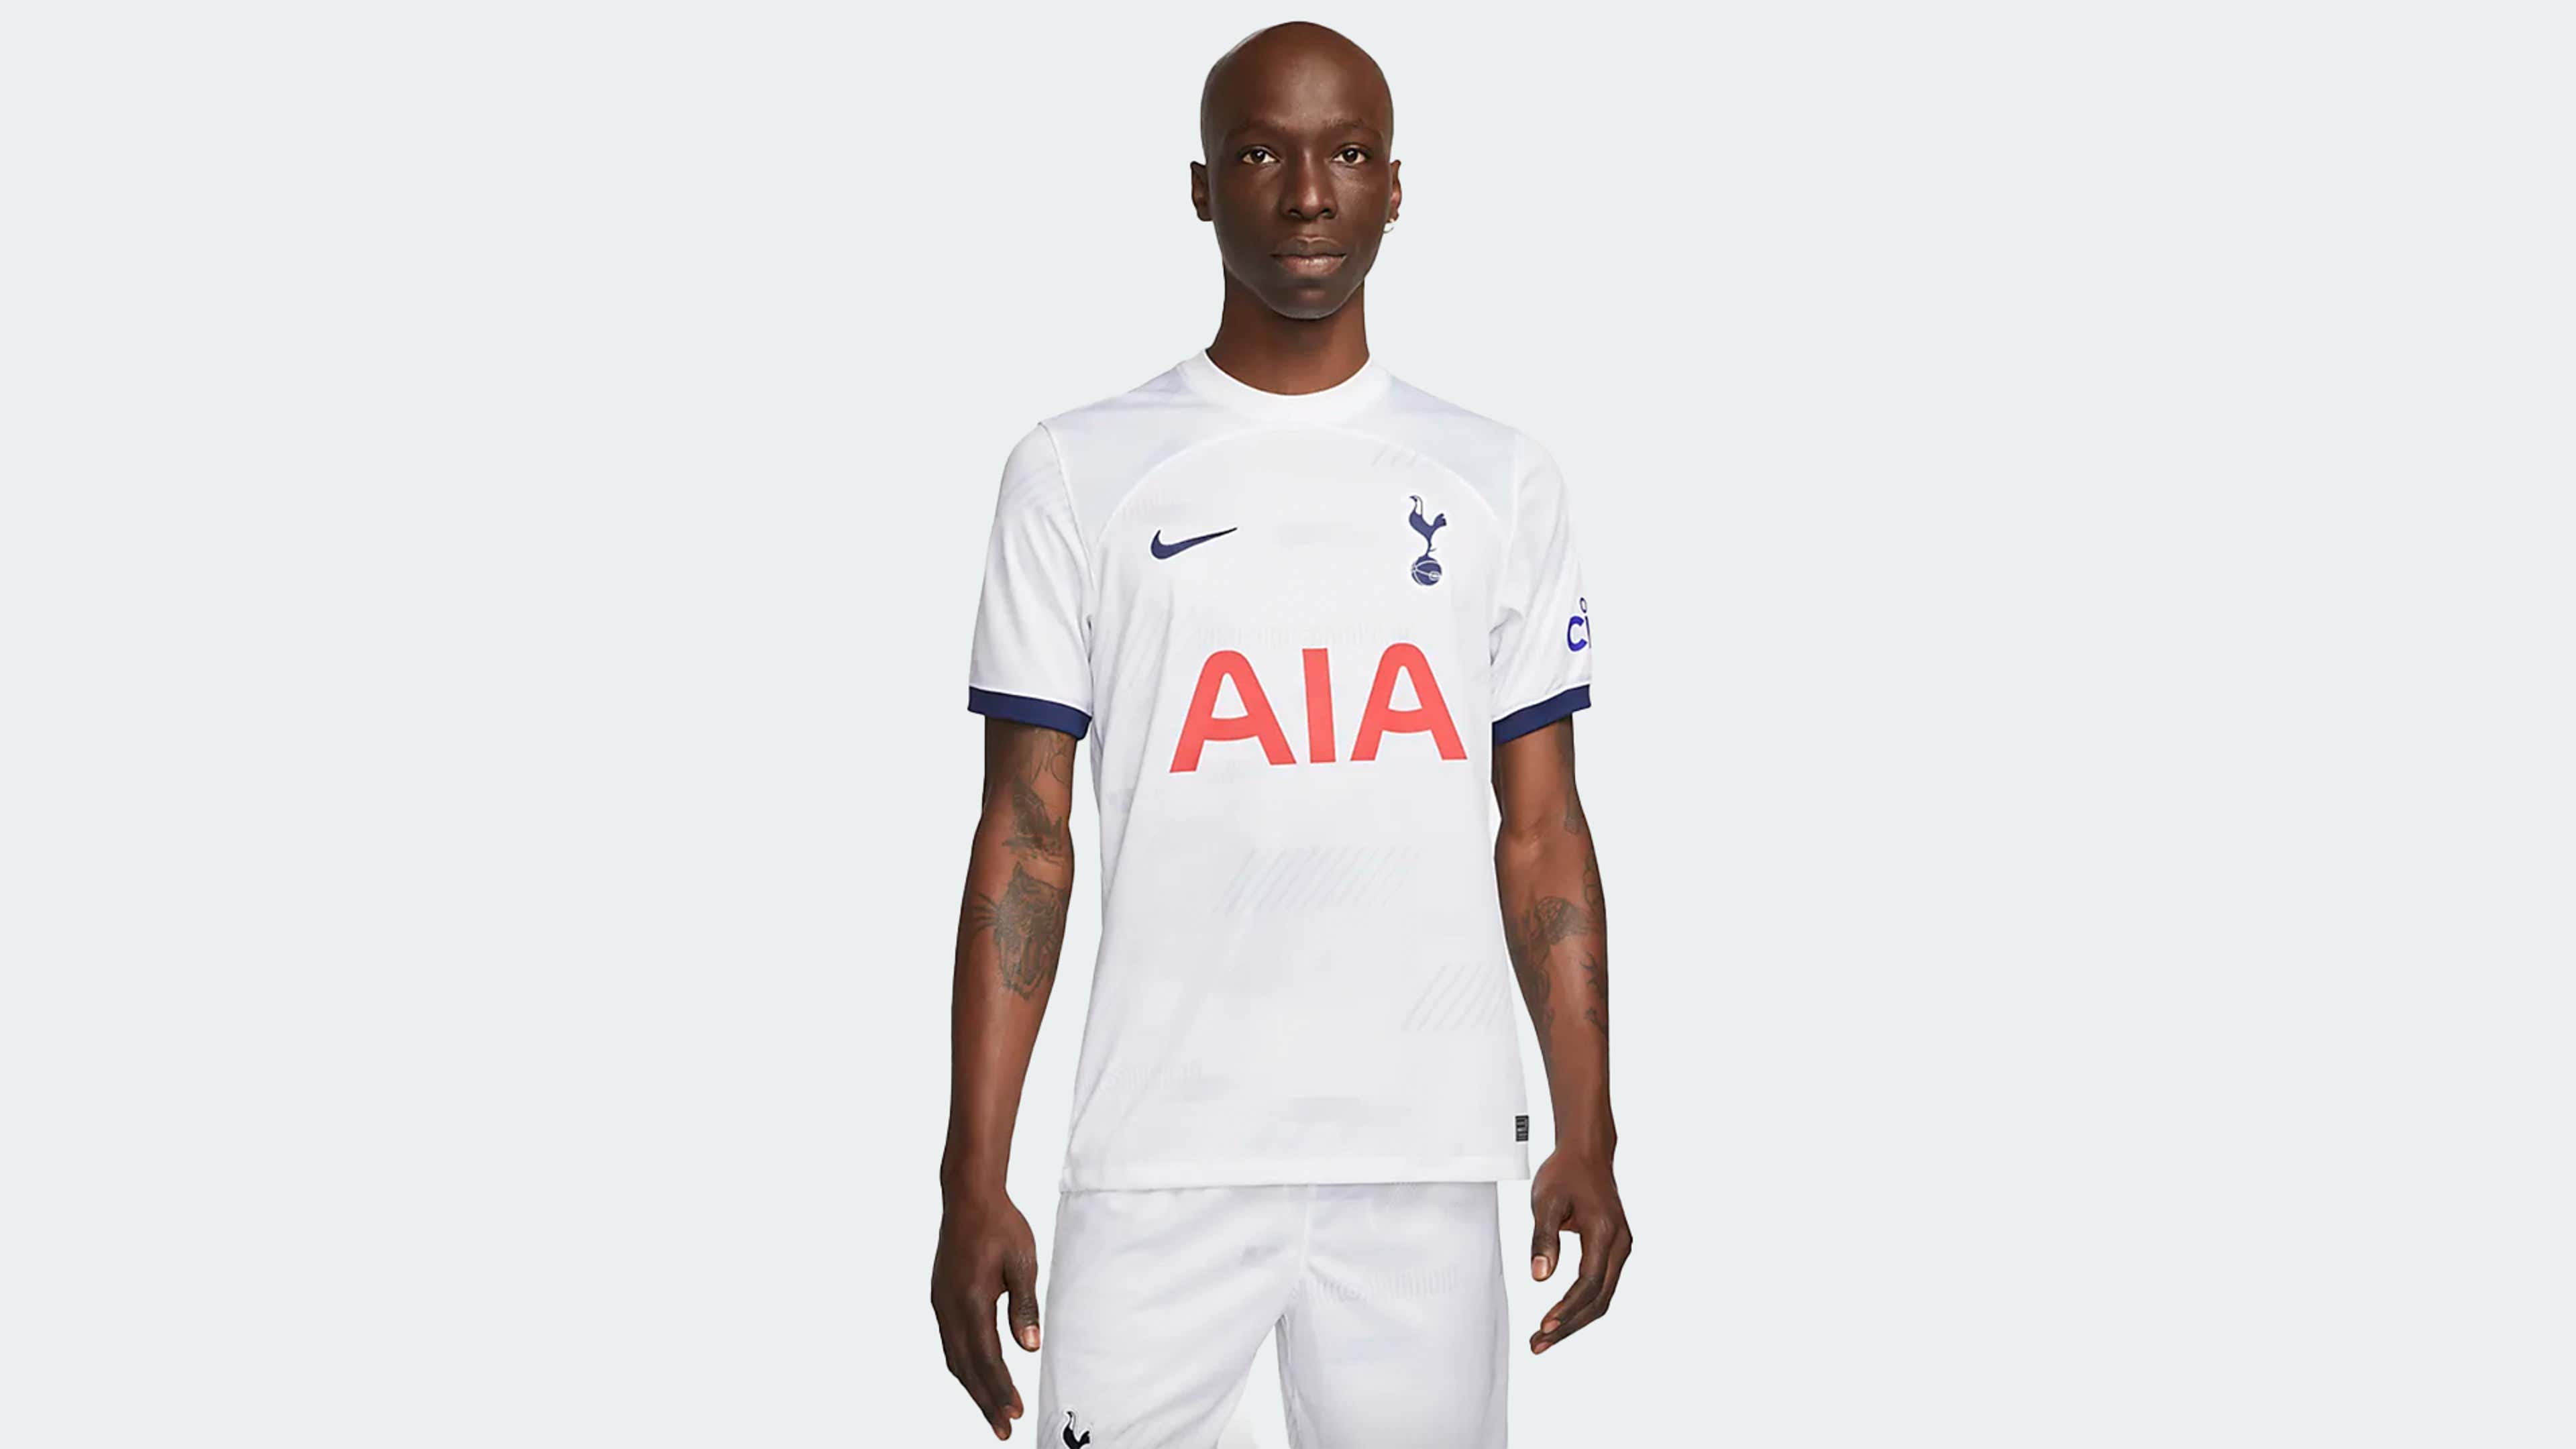 Tottenham Hotspur 23/24 Away Kit Available now at all Weston